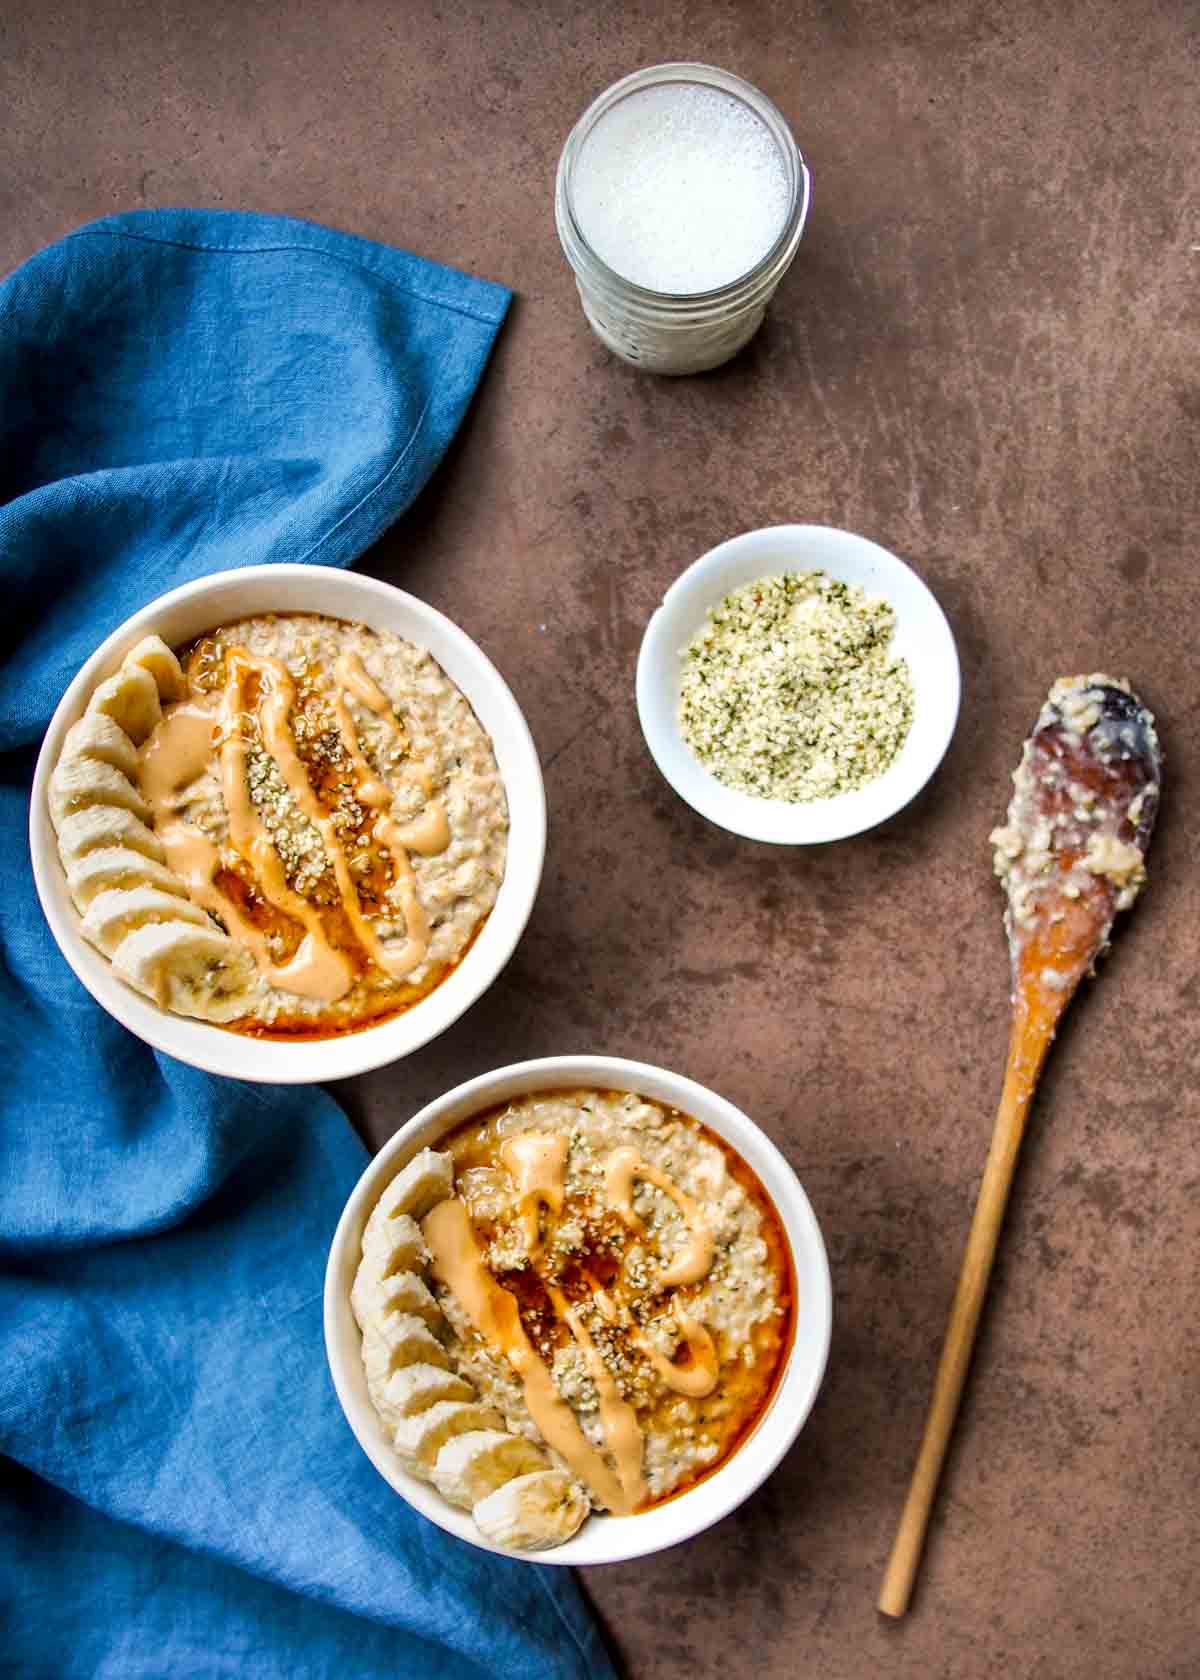 high protein steel-cut oats in white bowls with blue linen napkin and wooden spoon